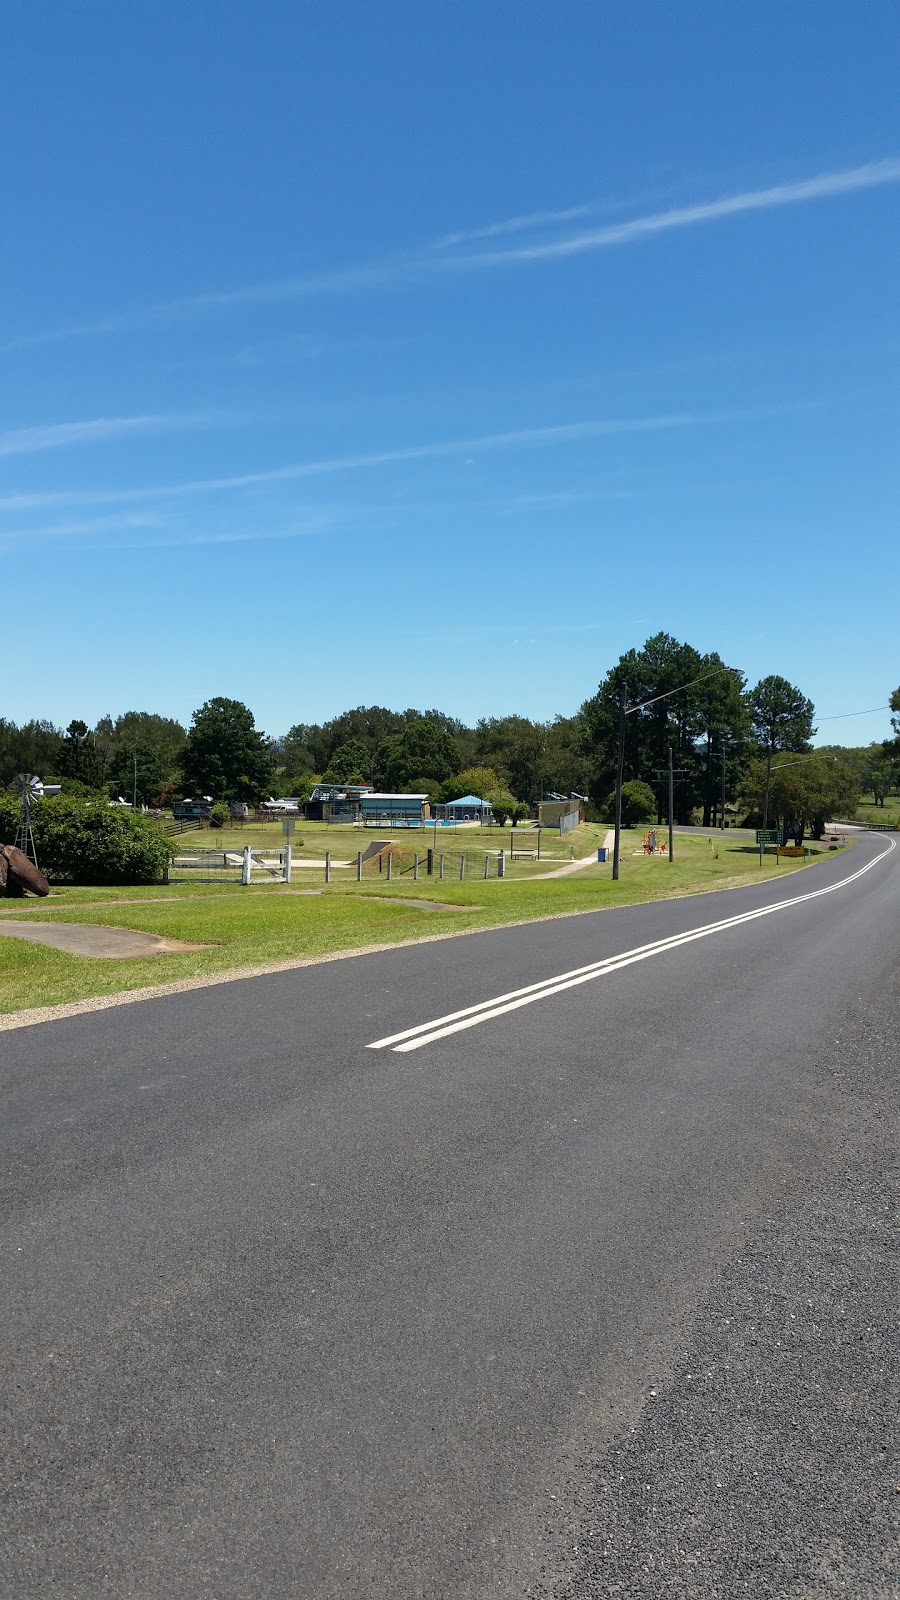 Woodenbong Campground | campground | 127 Unumgar St, Woodenbong NSW 2476, Australia | 0427612919 OR +61 427 612 919